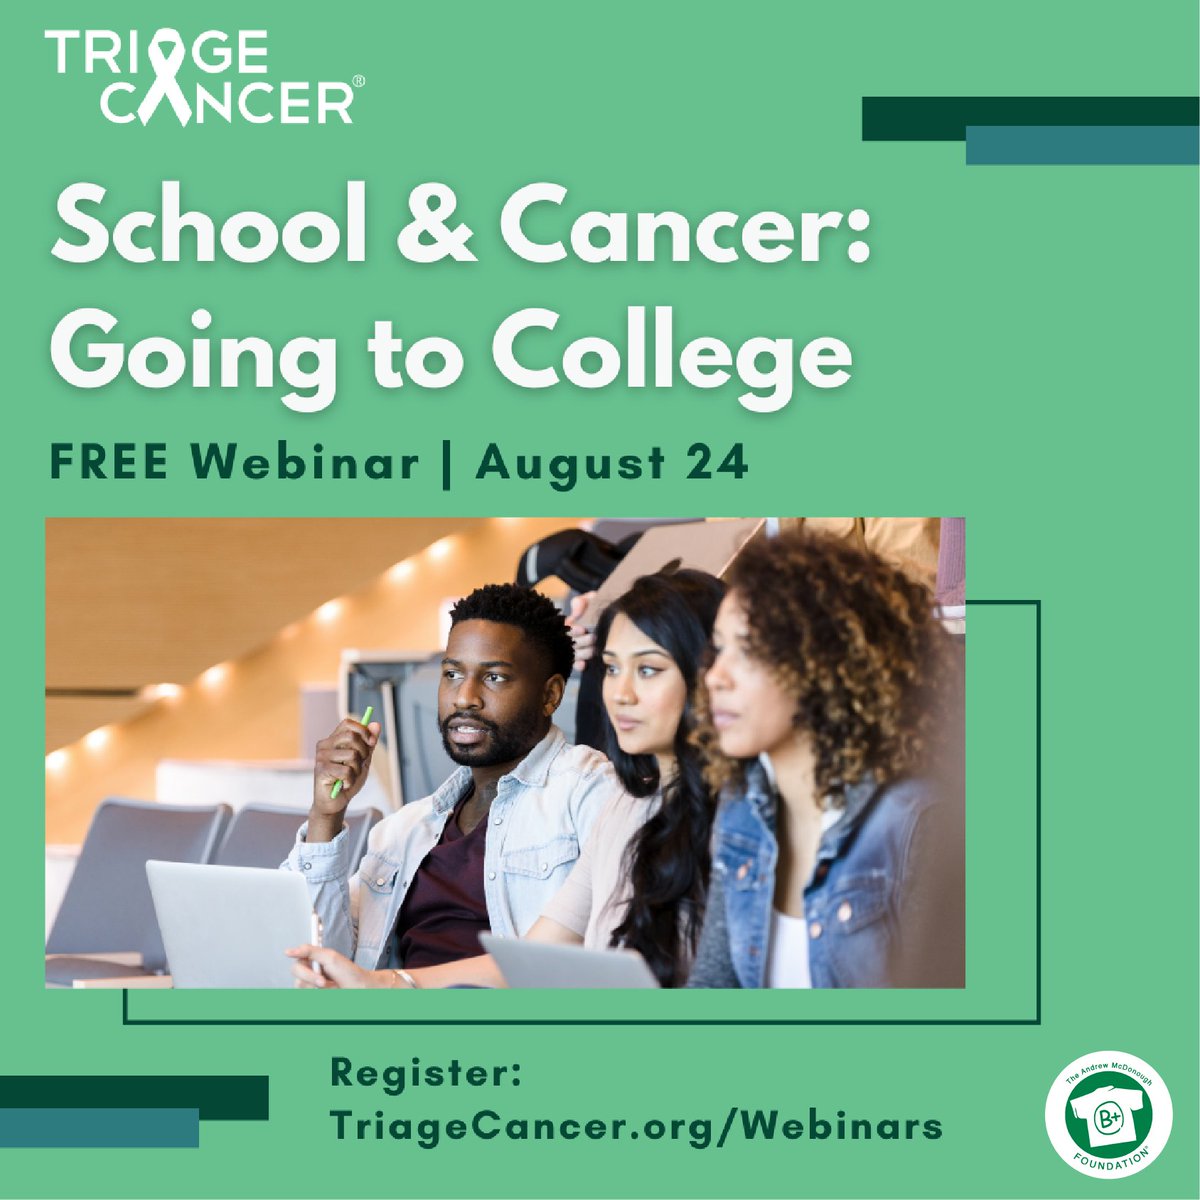 We're partnering with @TriageCancer for a FREE webinar on 8/24 about navigating college and cancer. Register here: triagecancer.org/webinars

We’ll talk about help through accommodations, working with professors, & more.
#TriageTalks #CancerRights #BeyondDiagnosis #ayacancer